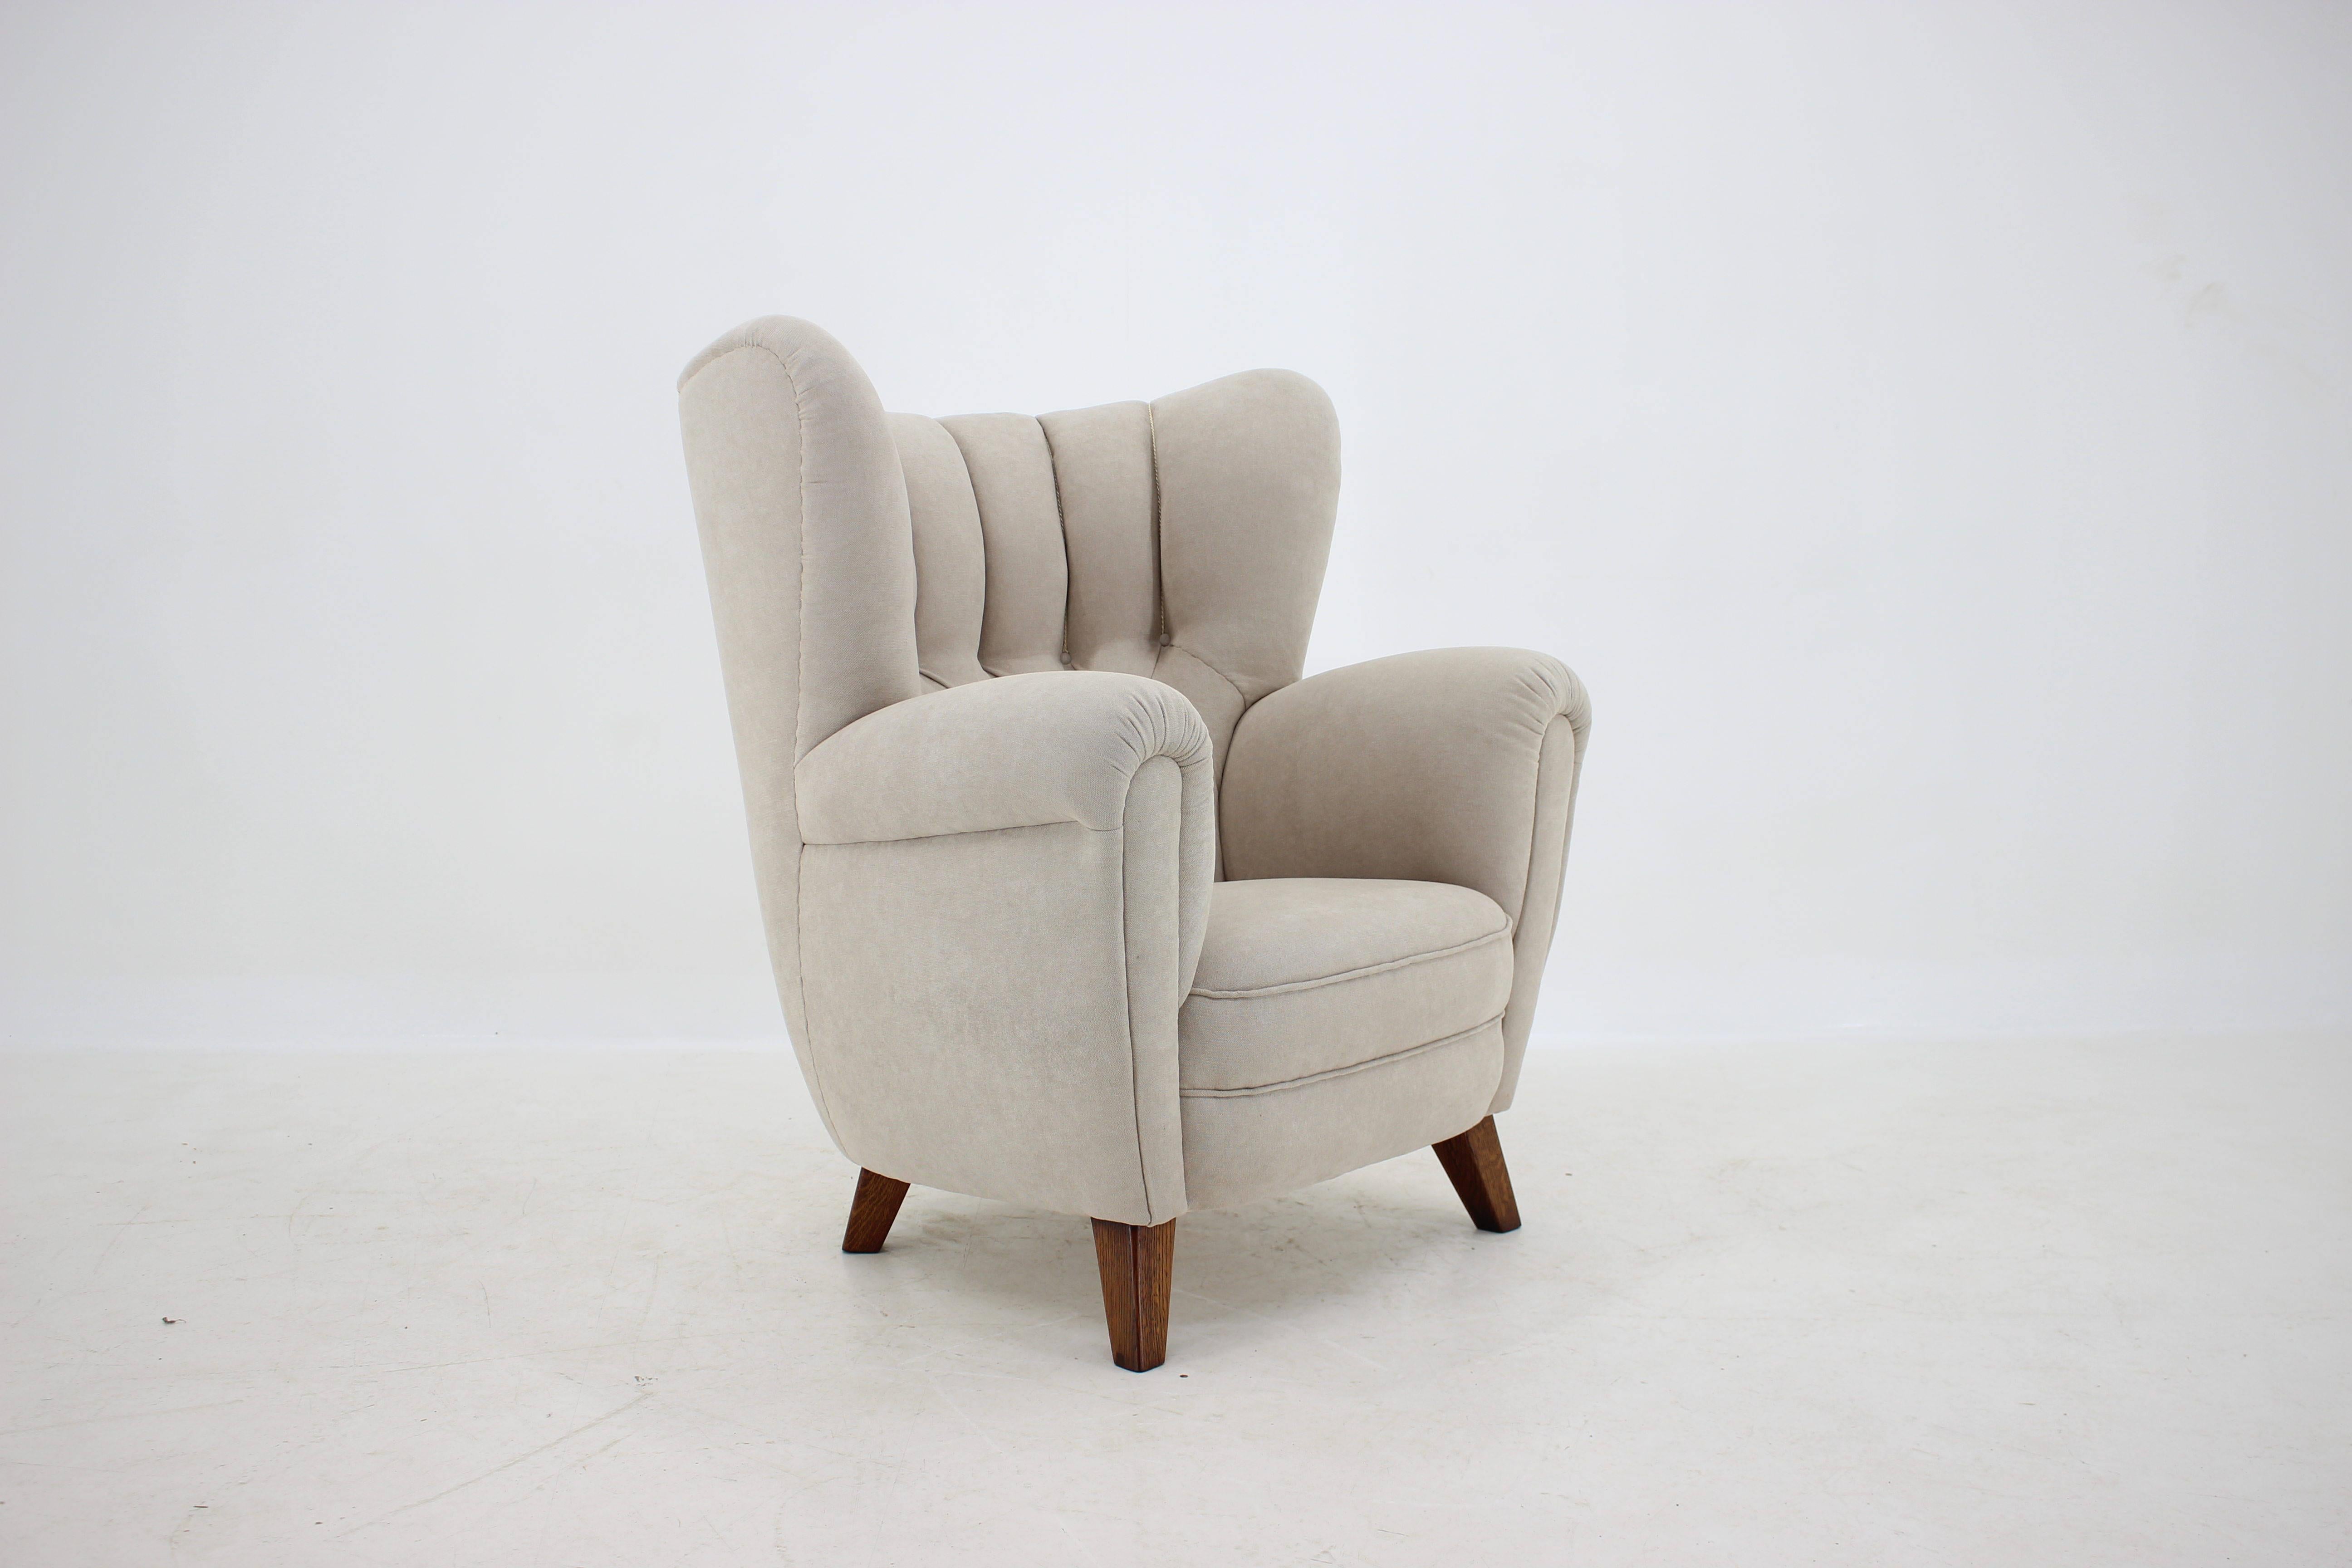 - Newly upholstered in light beige fabric upholstery.